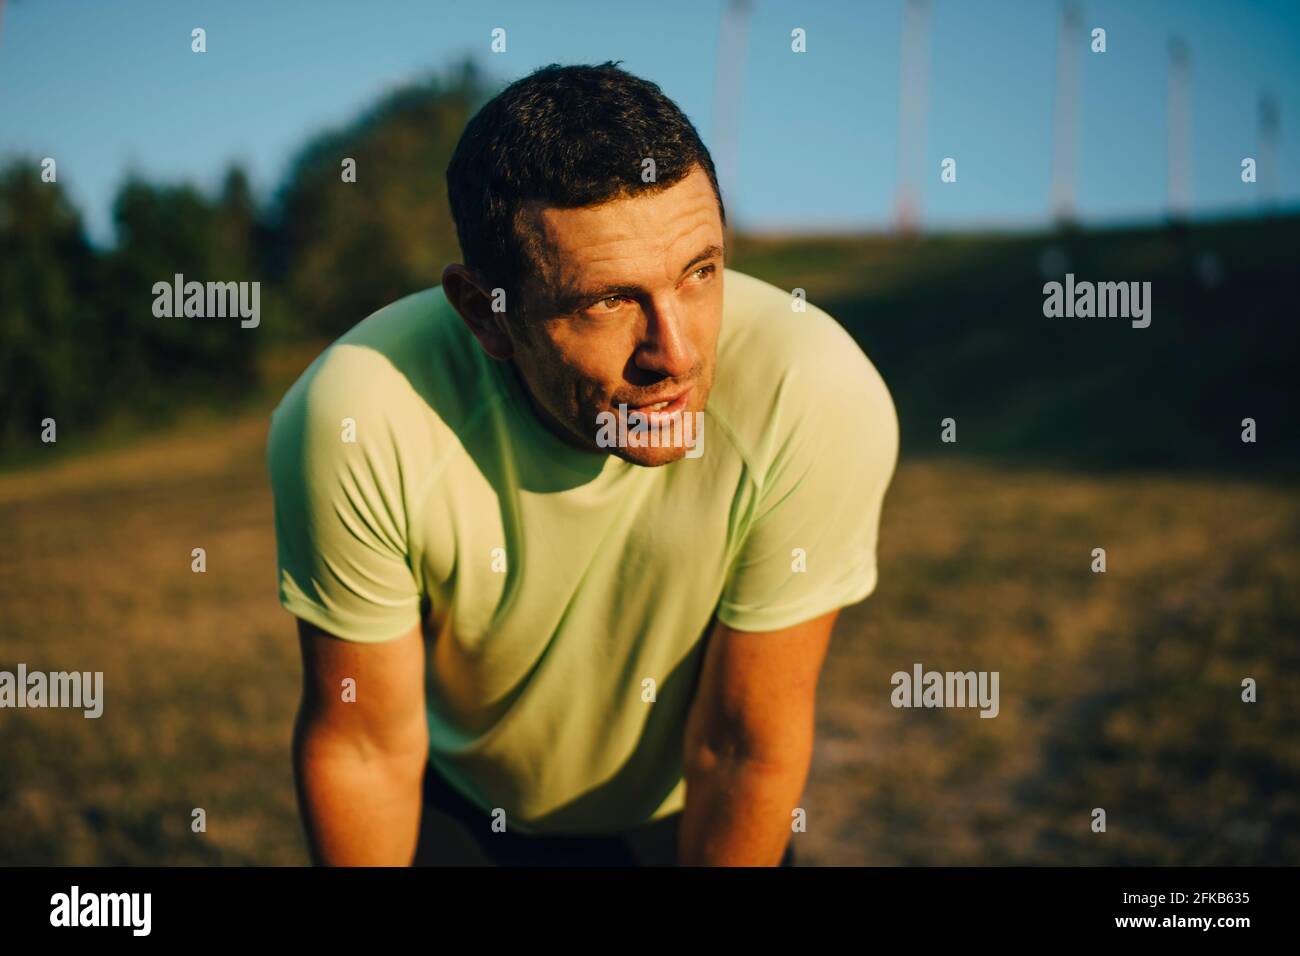 Male athlete looking away during sunset Stock Photo